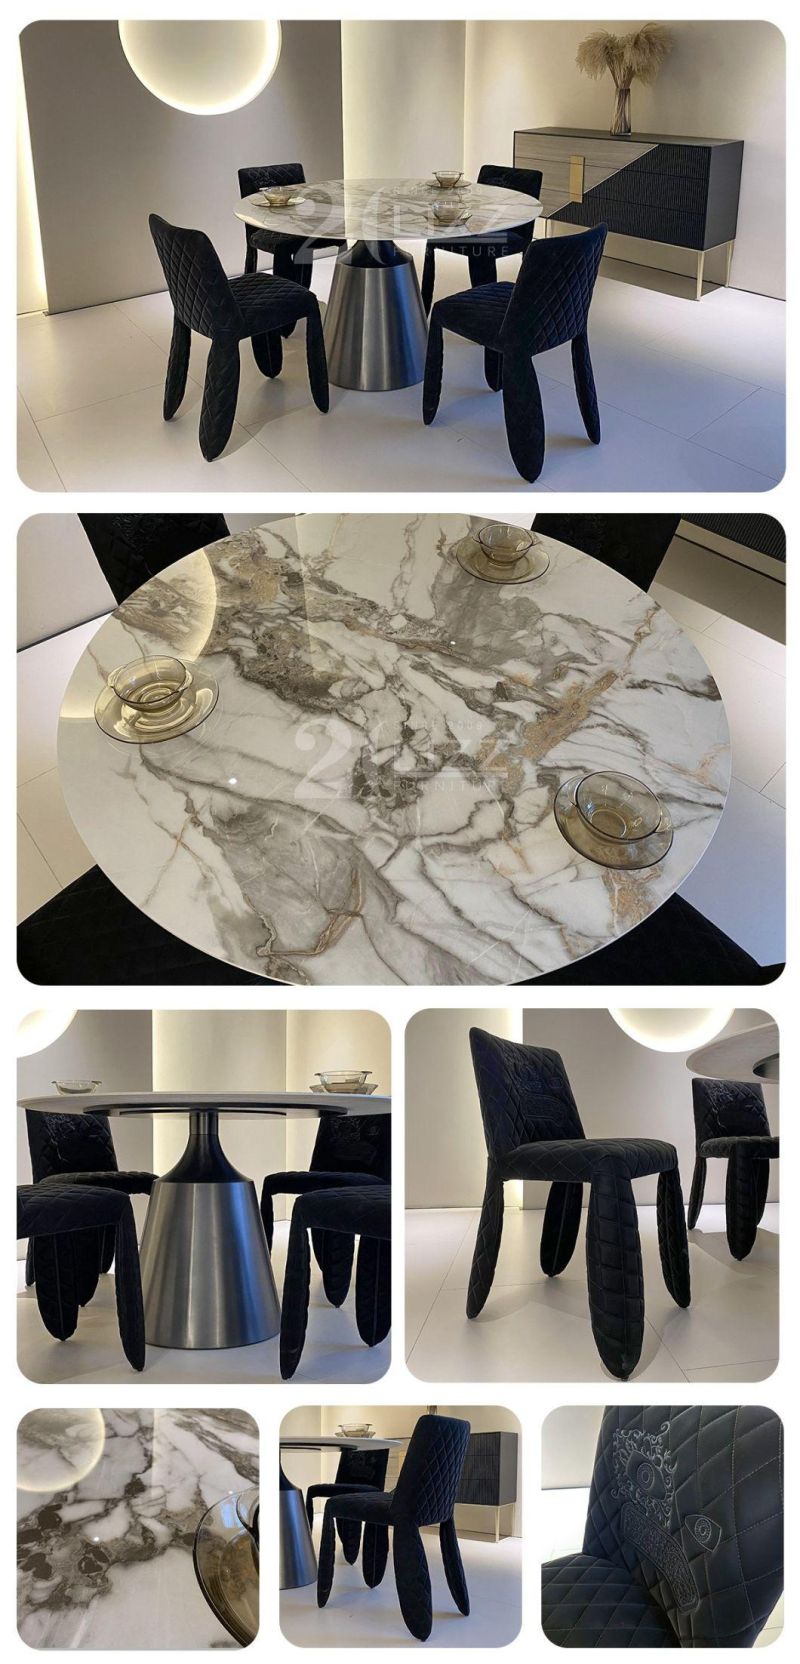 Luxury Metal Feet Round Shape Marble Top Table with Fabric Chair & Cabinet Dining Room Furniture Set